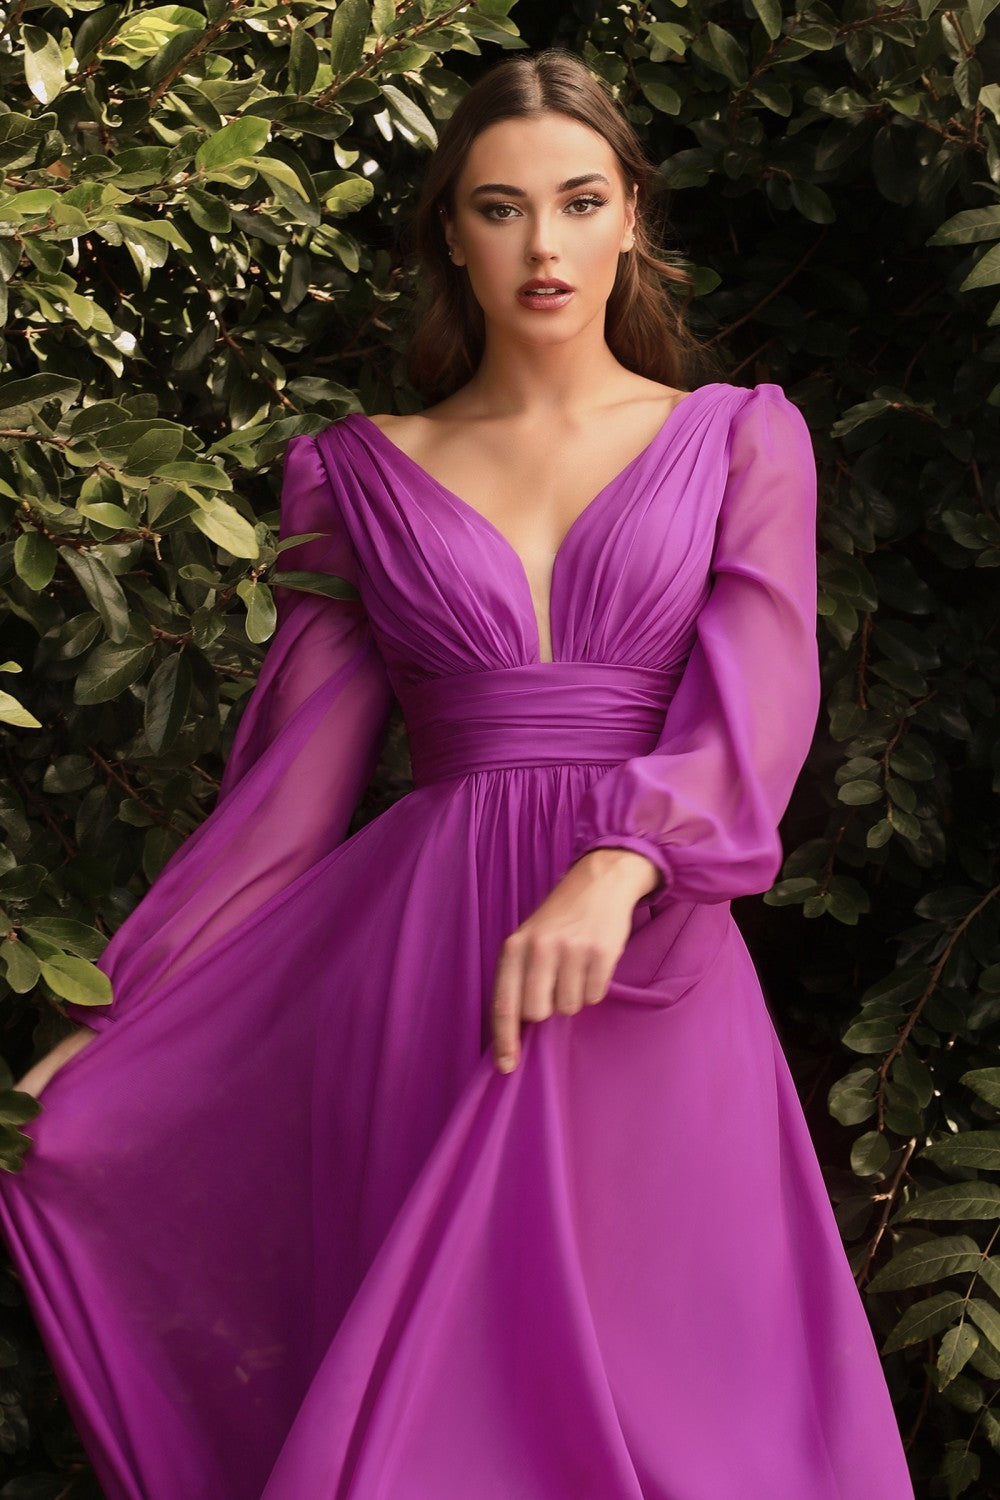 Robbi Bridesmaid Dress Long Sleeve Chiffon Gown 740192AR-Orchid SAMPLE IN STORE